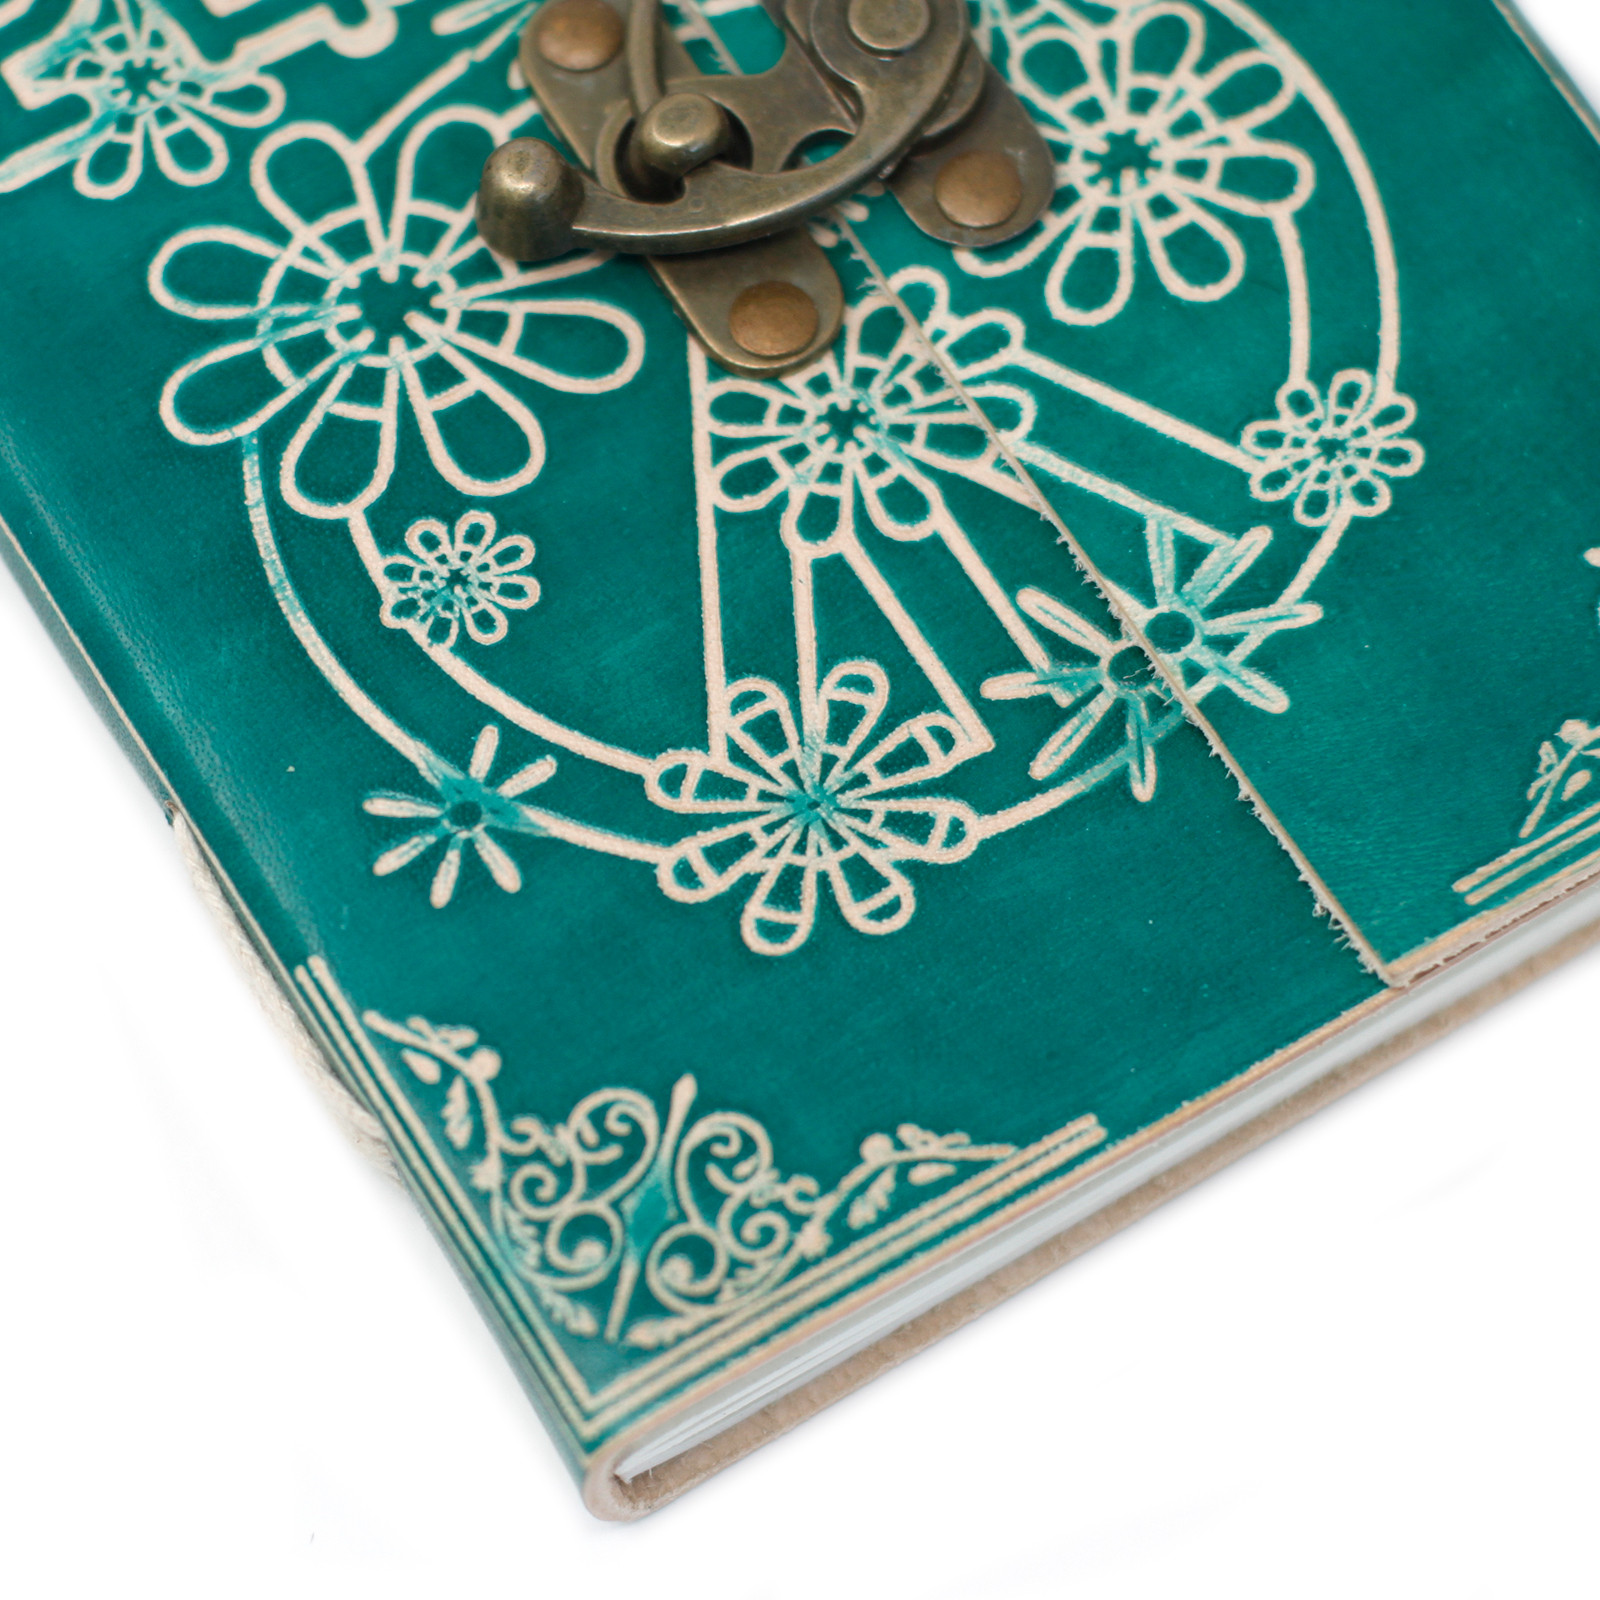 Leather Green Peace with Lock Notebook (7x5")